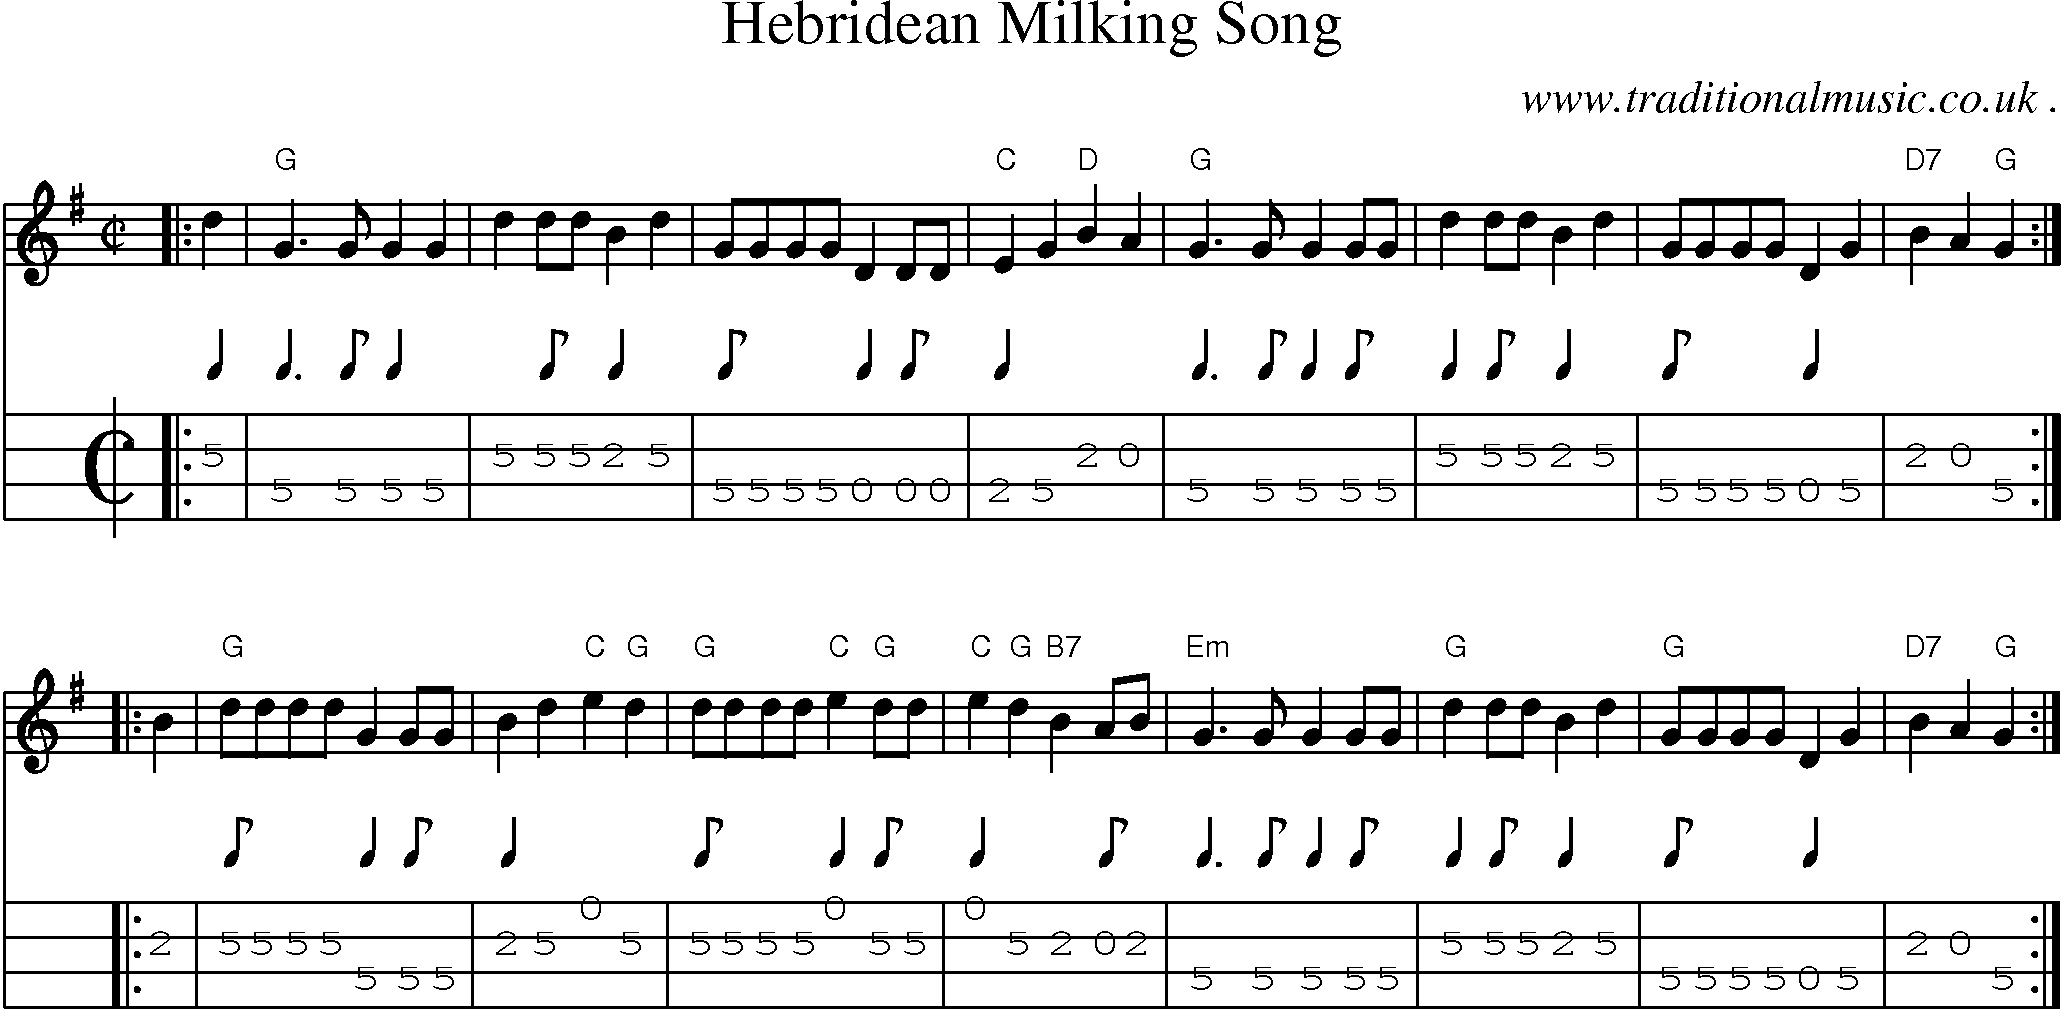 Sheet-music  score, Chords and Mandolin Tabs for Hebridean Milking Song